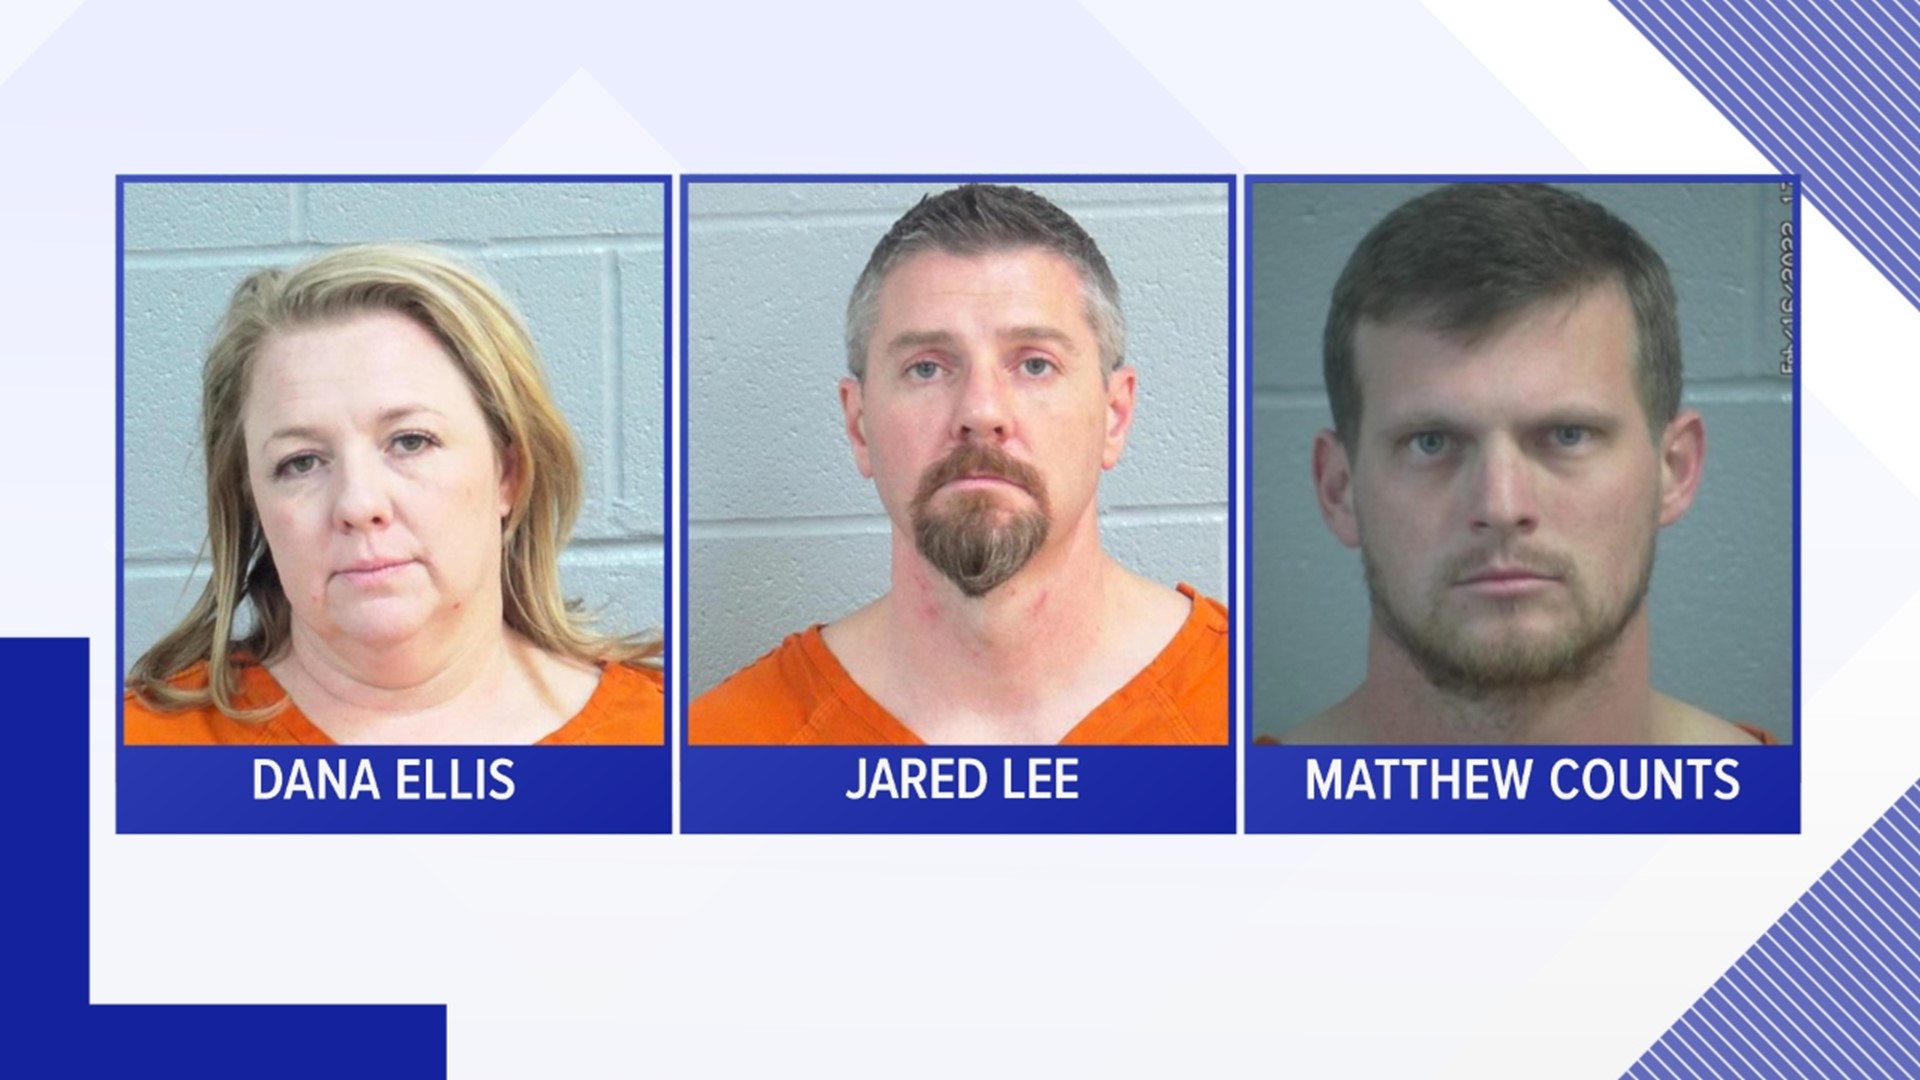 Jared Lee, Dana Ellis and Matthew Counts were arrested Thursday for failure to make a required child abuse report.